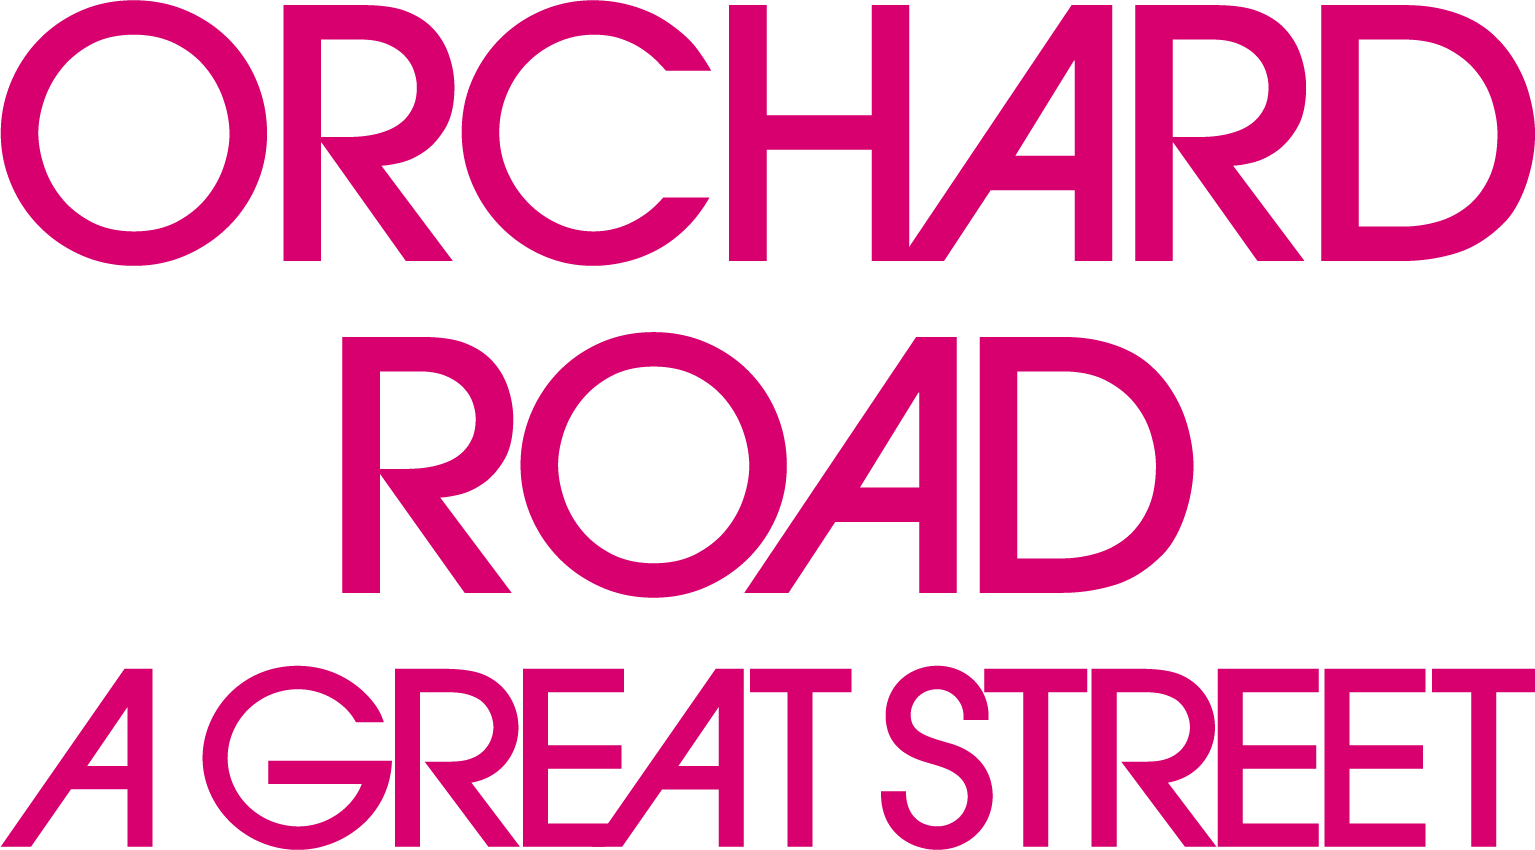 Orchard Road deals and Singapore promotions